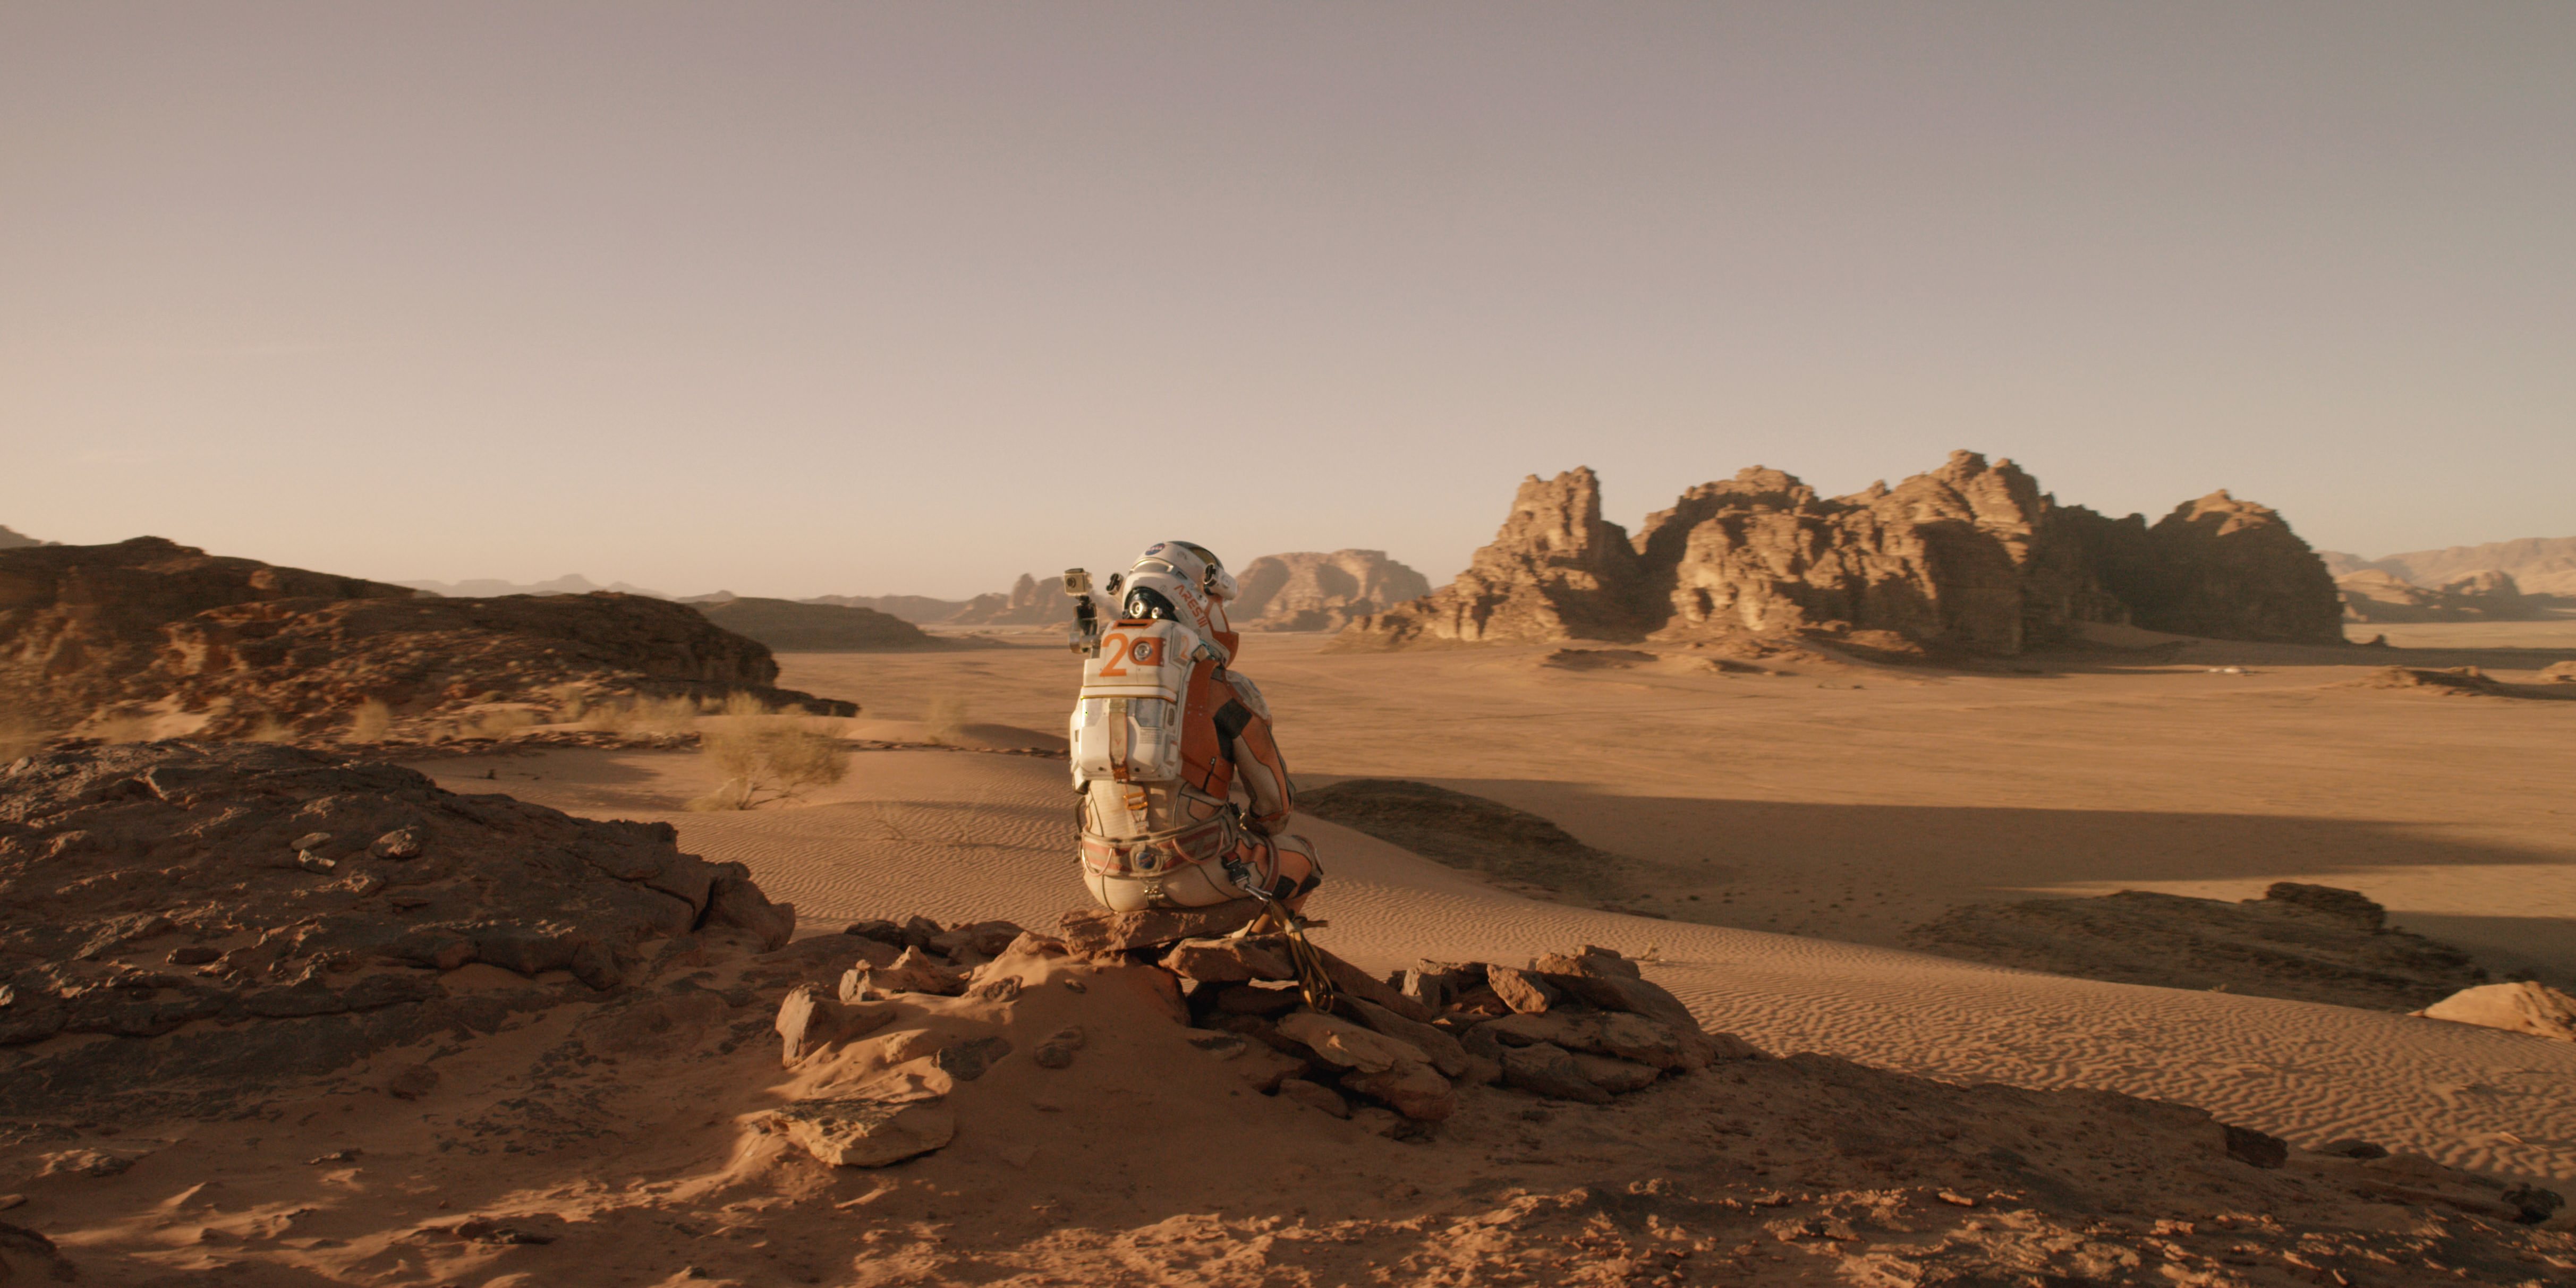 Scene from ‘The Martian’ starring Matt Damon as NASA astronaut Mark Watney contemplating magnificent panoramic vista while stranded alone on Mars.    Credits: 20th Century Fox